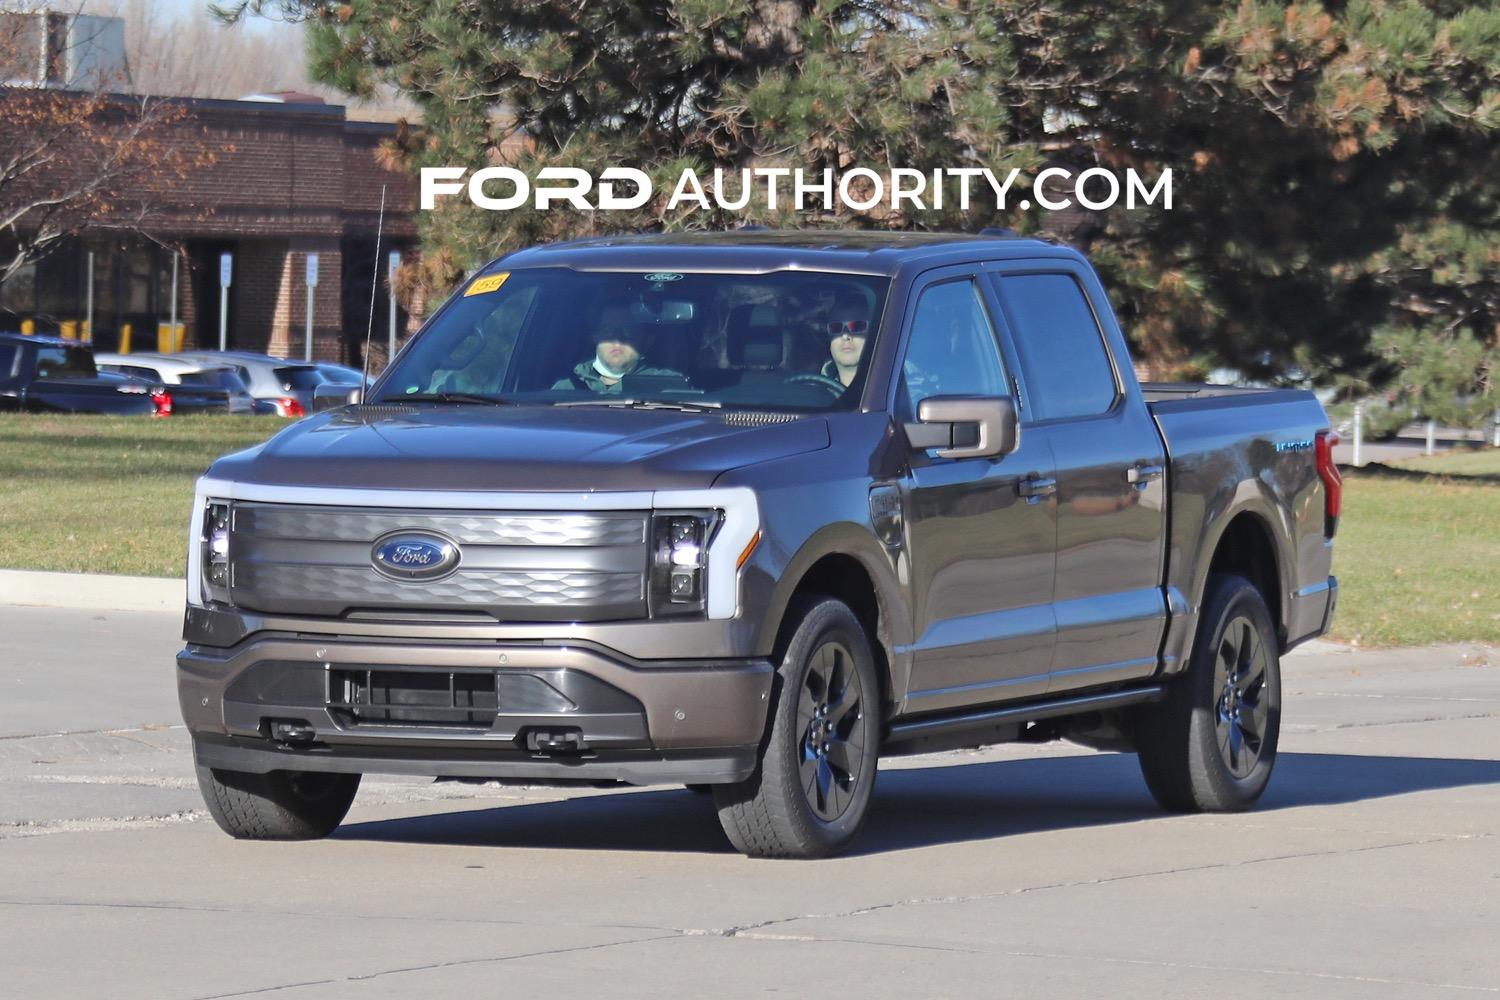 Ford F-150 Lightning Stone Gray F-150 Lightning Lariat - Live Sighting Pics 2022-Ford-F-150-Lightning-Lariat-Stone-Gray-First-Real-World-Pictures-Exterior-001